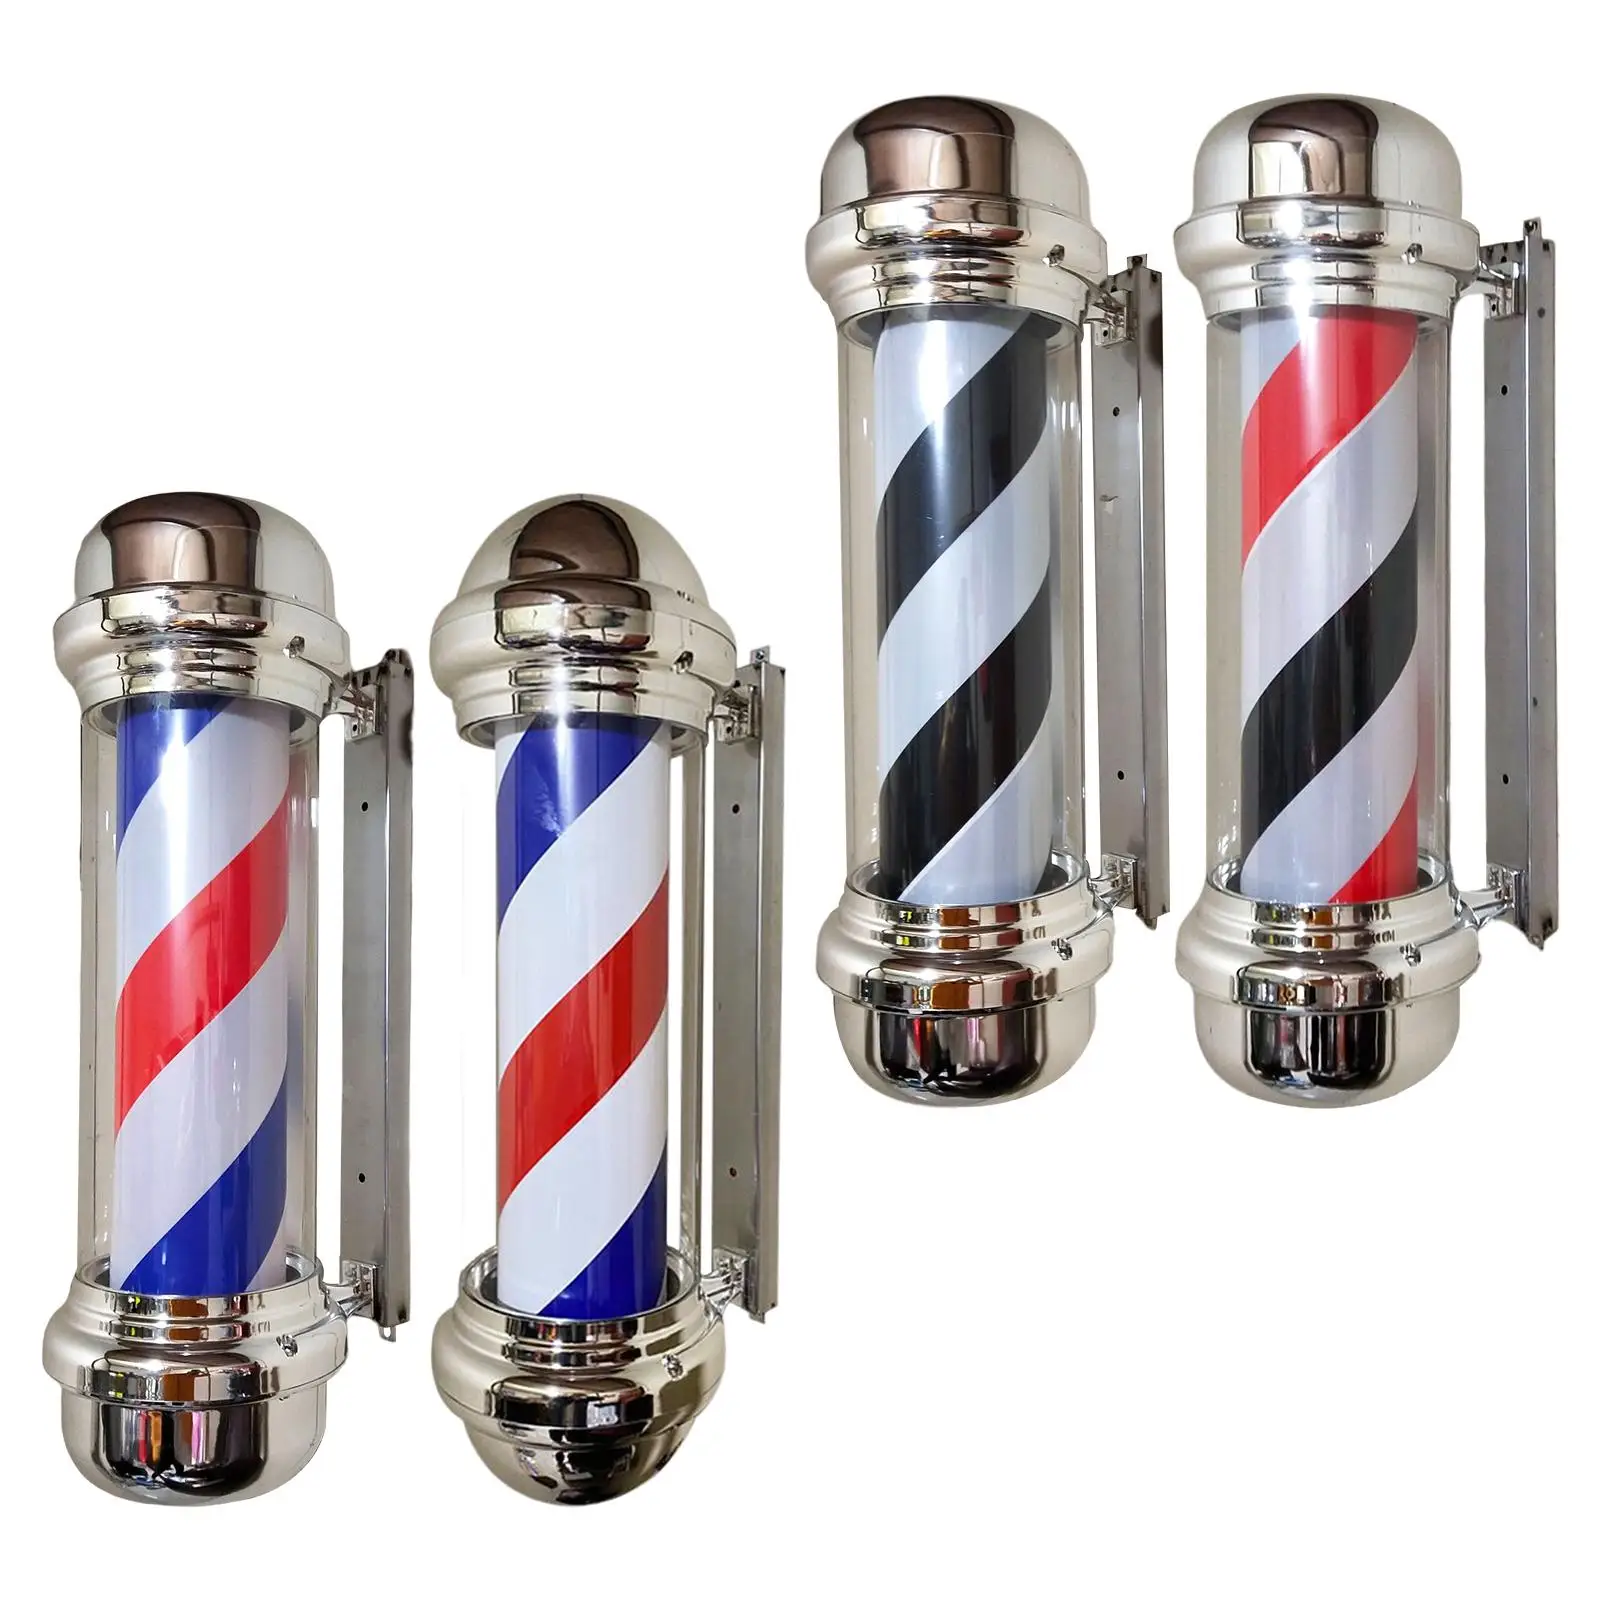 Barber Pole Light Save Energy 23`` Acrylic Outer Cylinder Barber Shop Rotating Light Hair Salon Open Sign for Indoor Outdoor